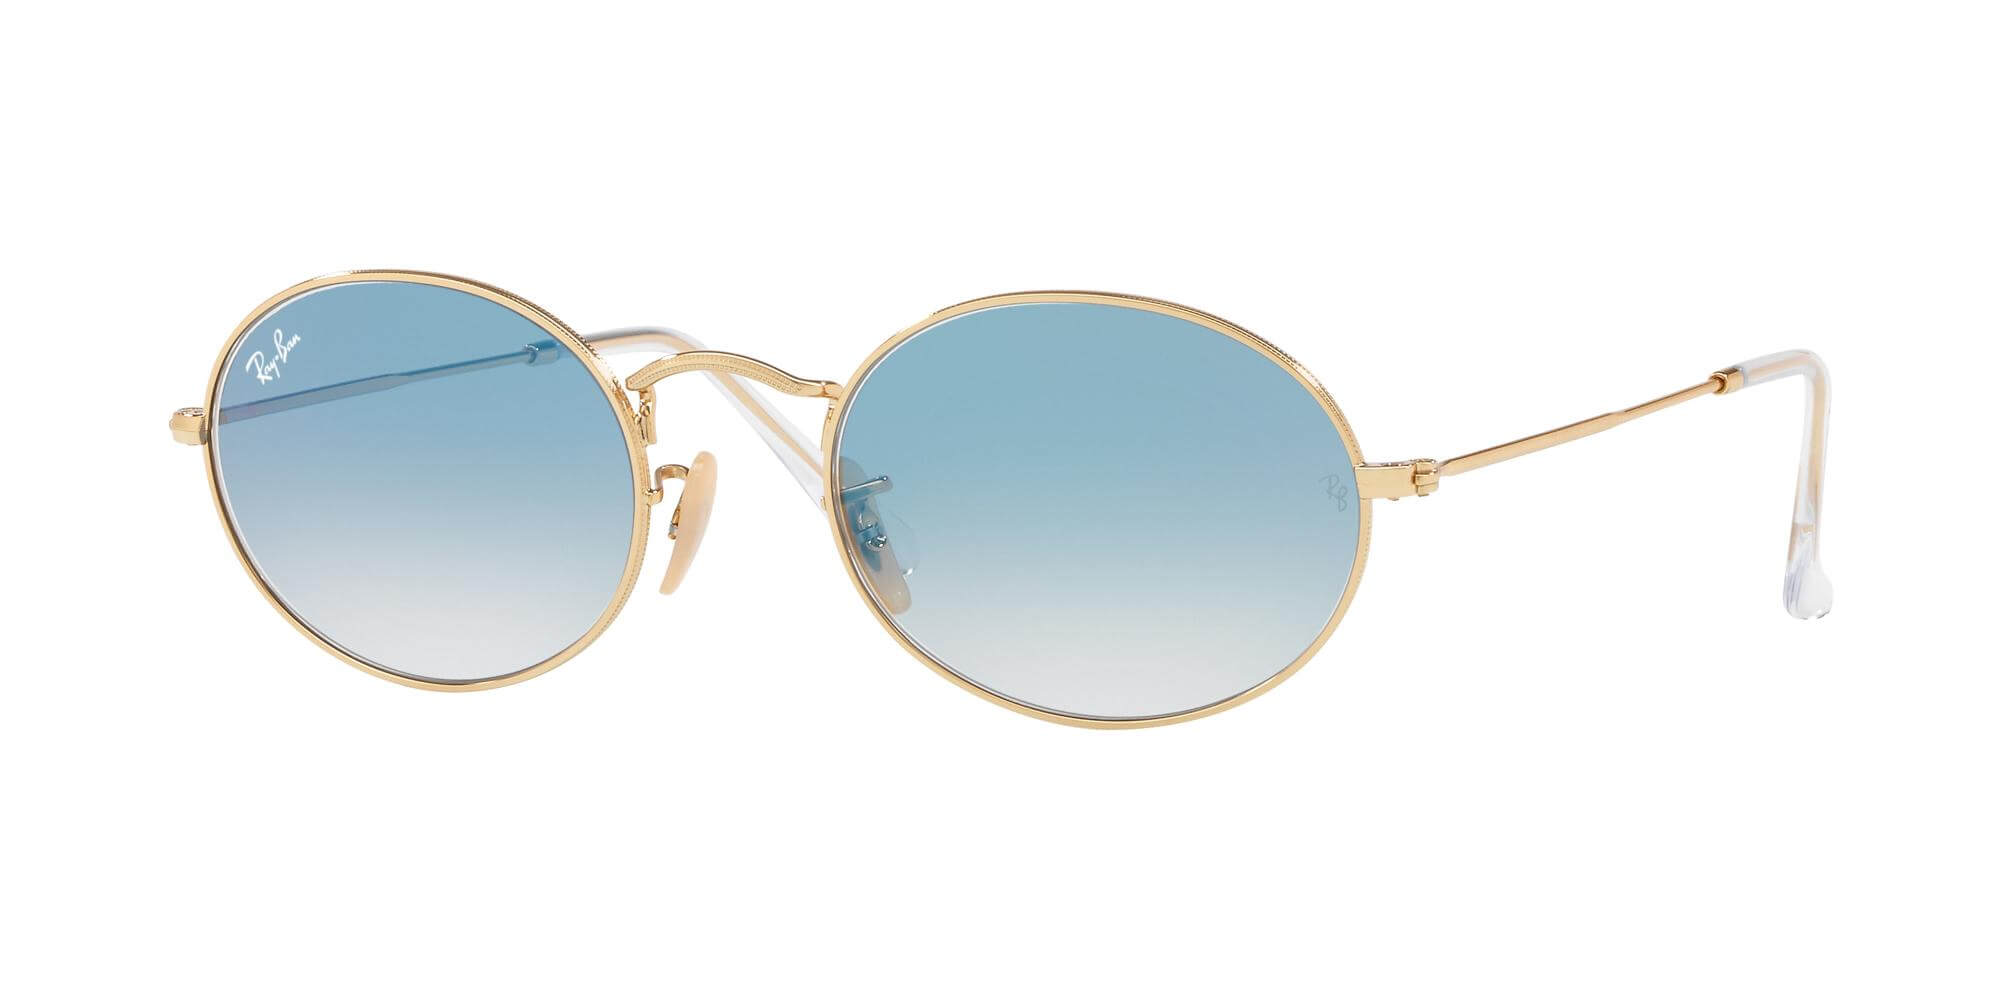 Ray-BanOVAL METAL RB 3547NGold/blue Shaded (001/3F A)